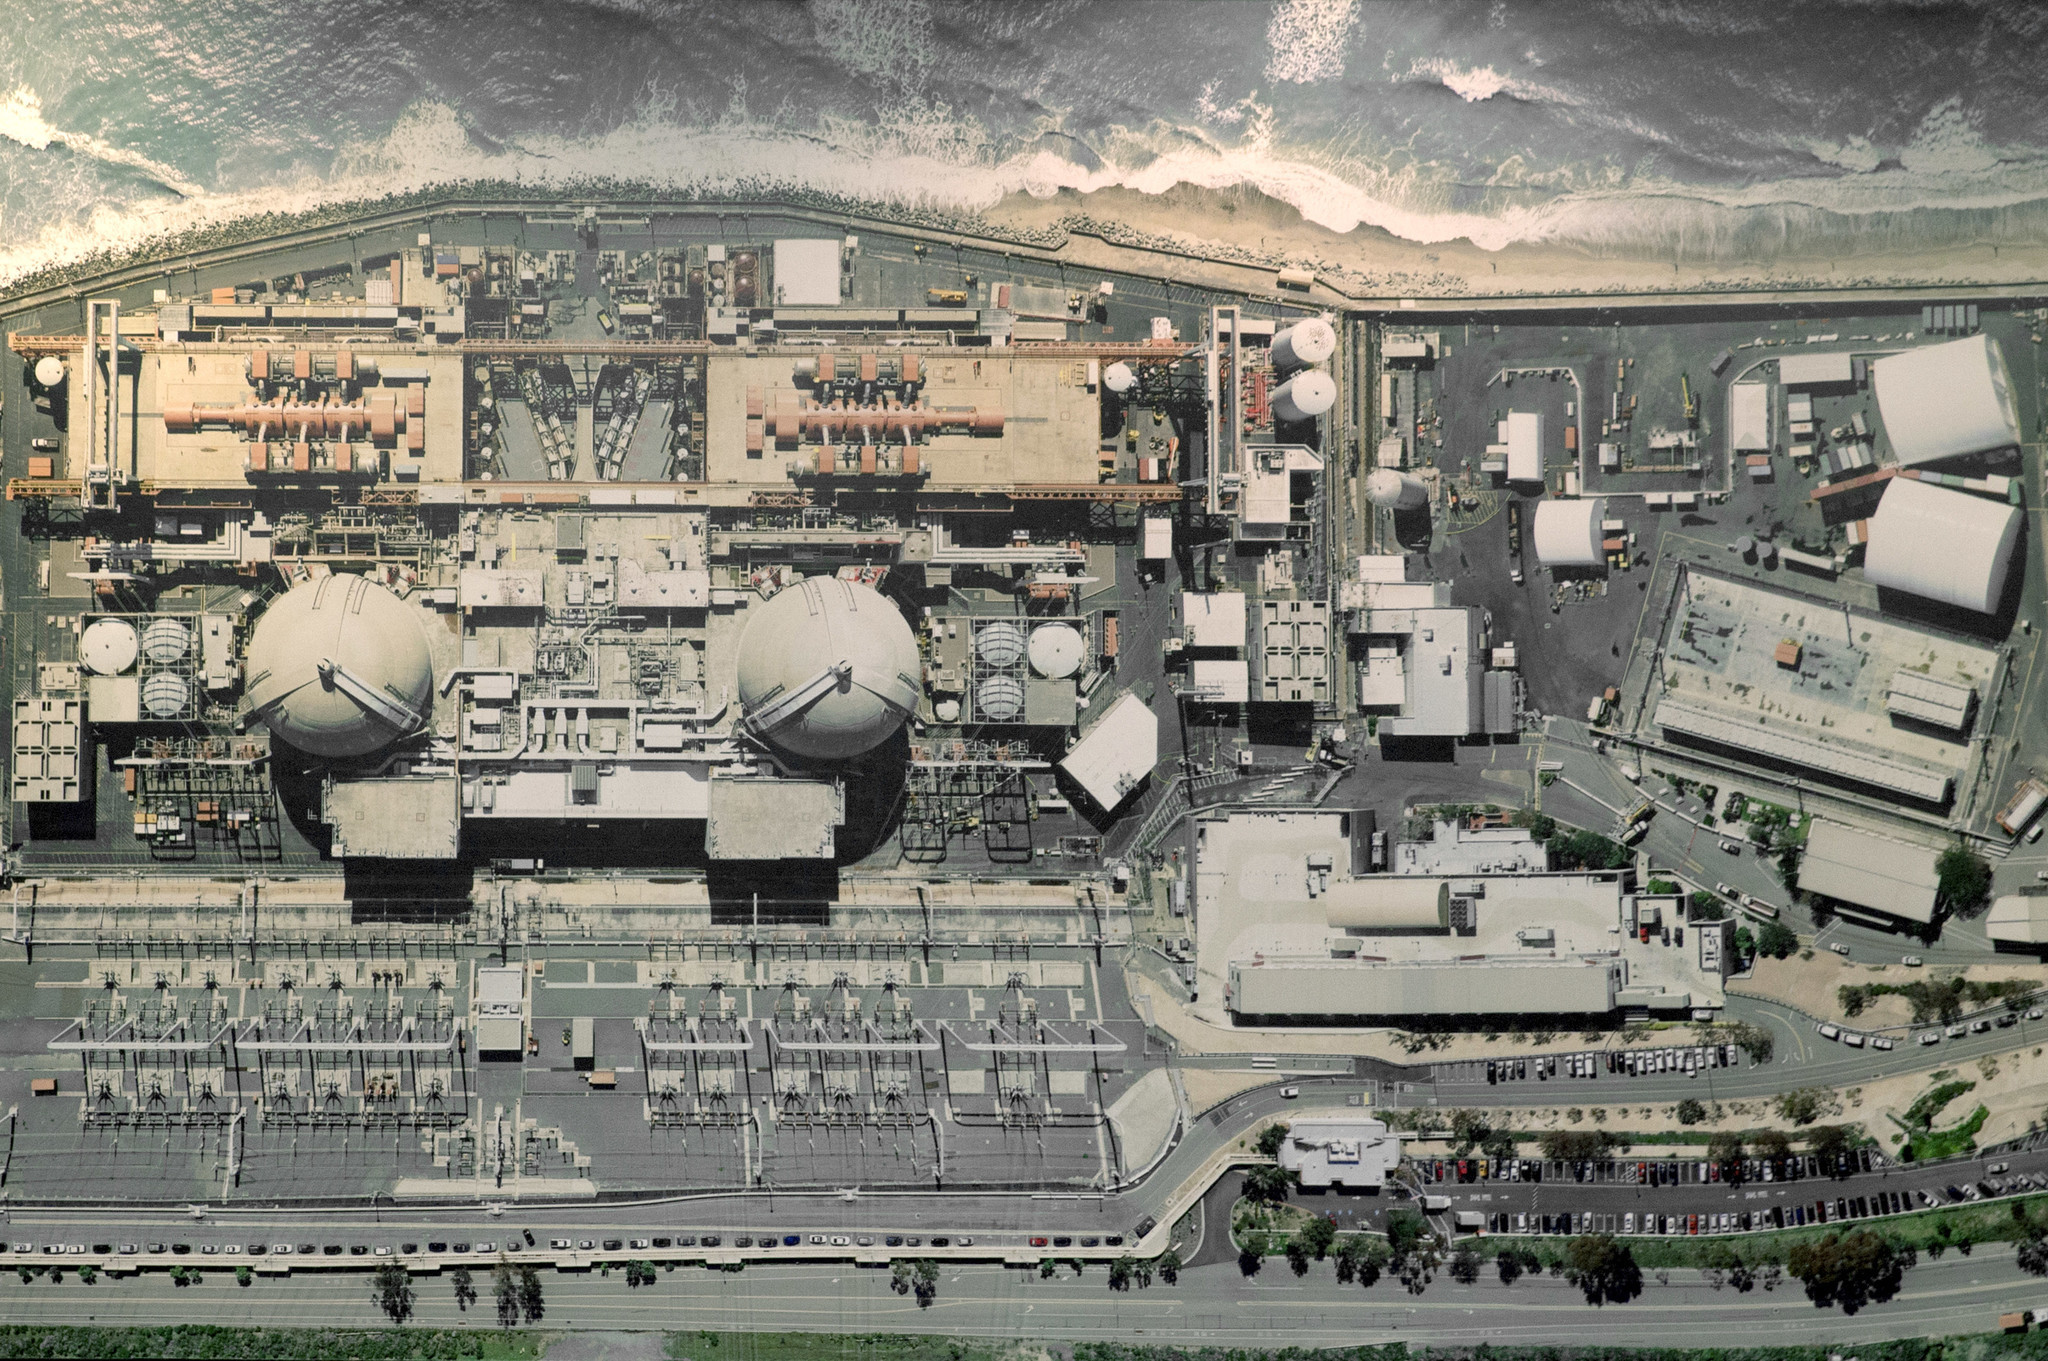 An aerial view of the closed San Onofre Nuclear Generating Station hangs on the wall of a conference room at the facility.